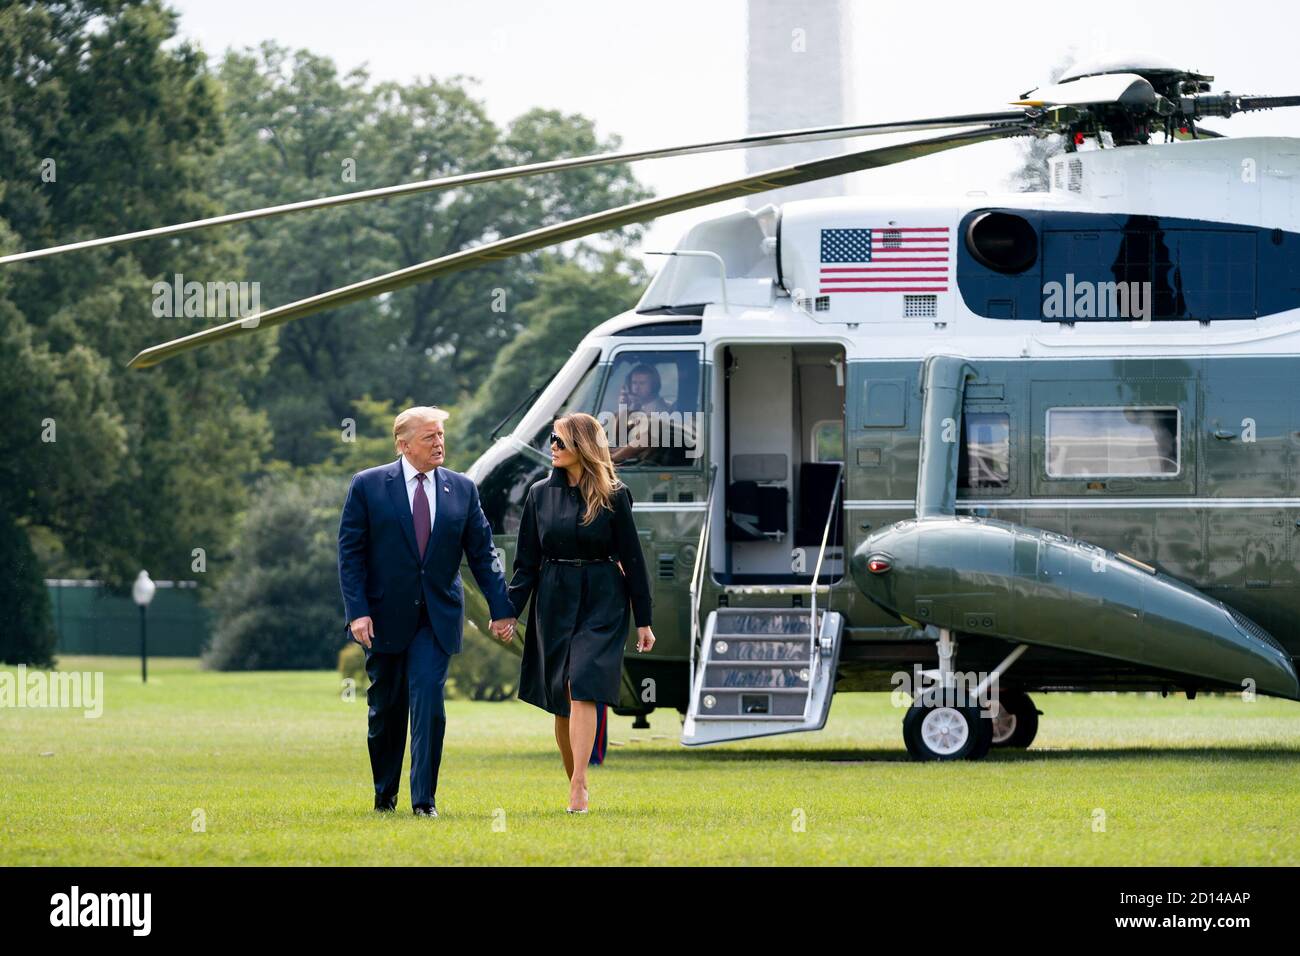 September 11. President Donald J. Trump and First Lady Melania Trump walk across the South Lawn of the White House after disembarking Marine One Thursday, Sept. 2, 2020, returning from their trip to the Flight 93 National Memorial in Stoystown, Pa. Stock Photo